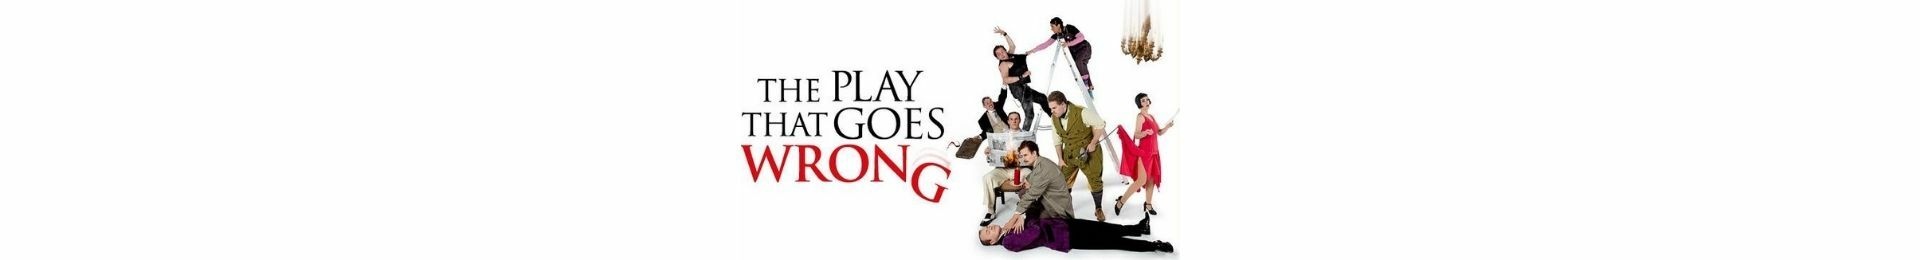 The Play That Goes Wrong - Manchester banner image